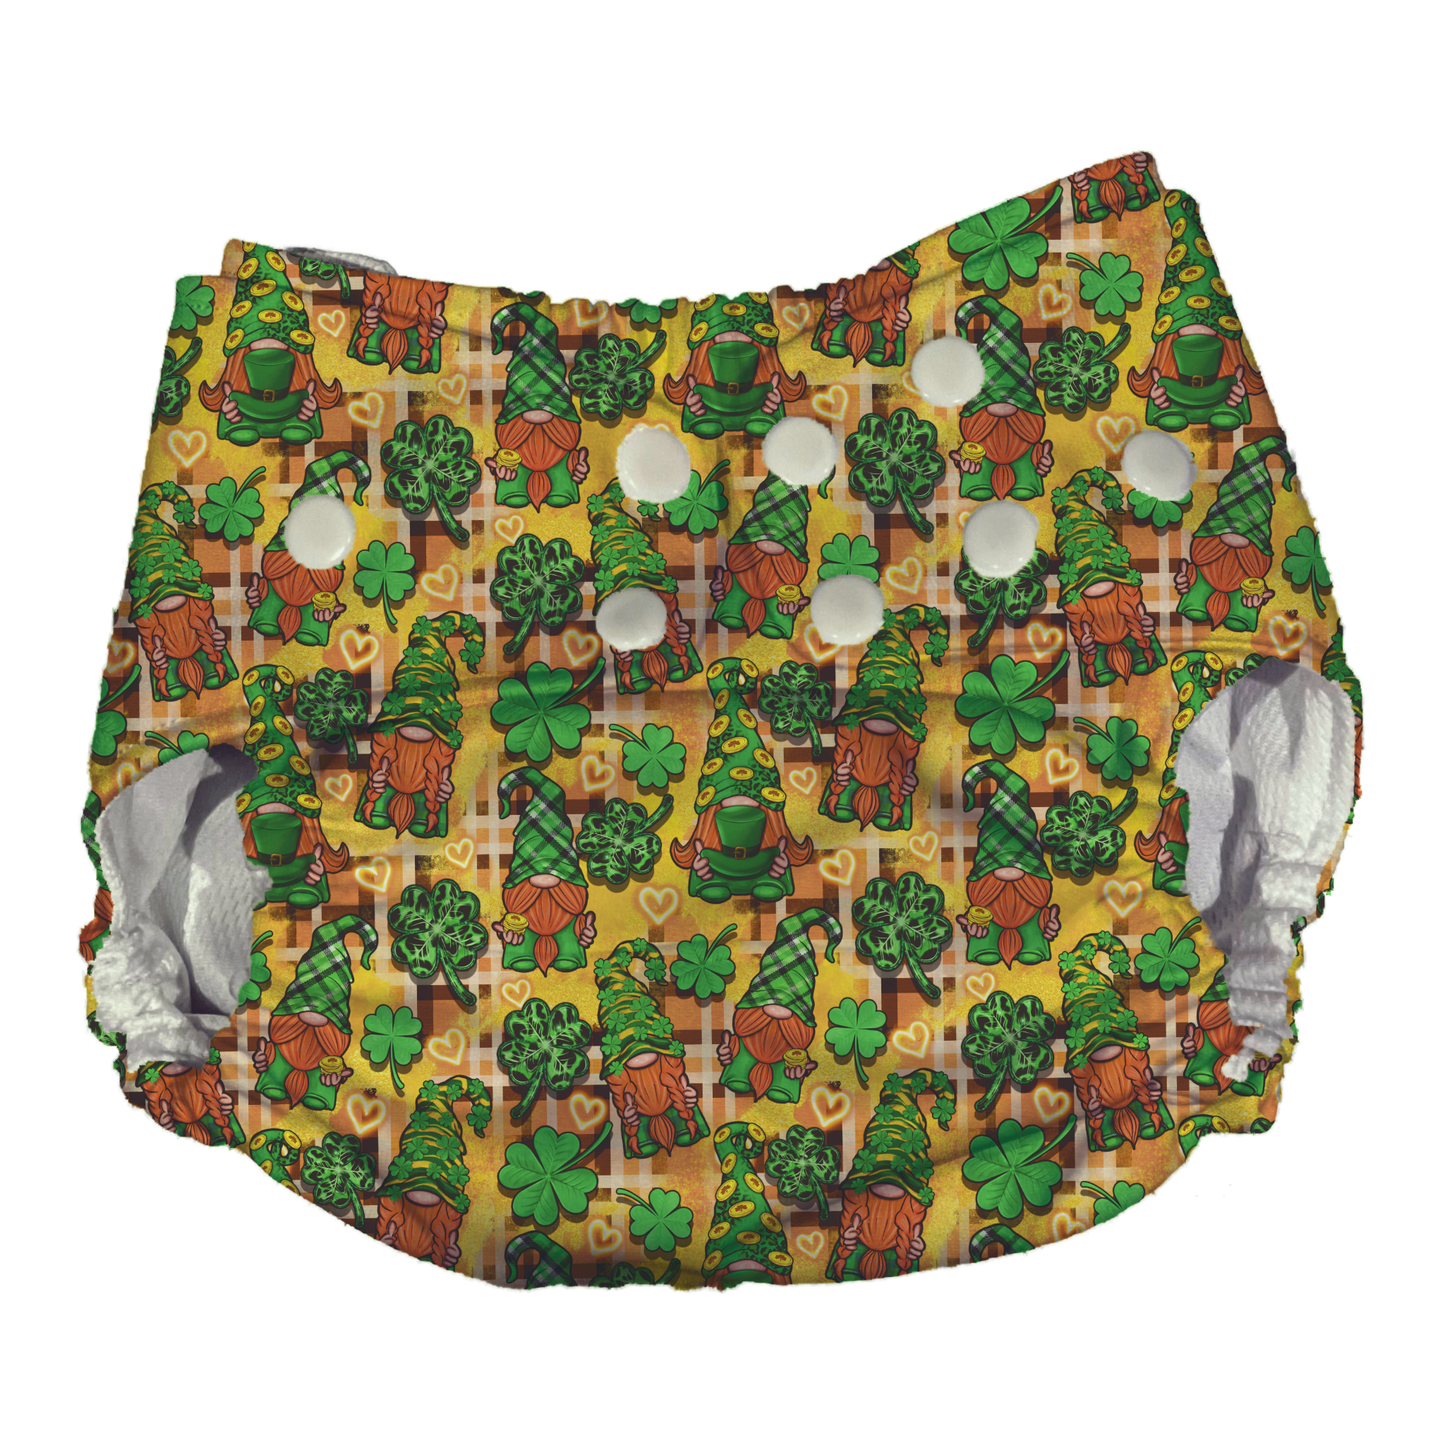 St. Patrick's Day Themed AI2 Cloth Diaper